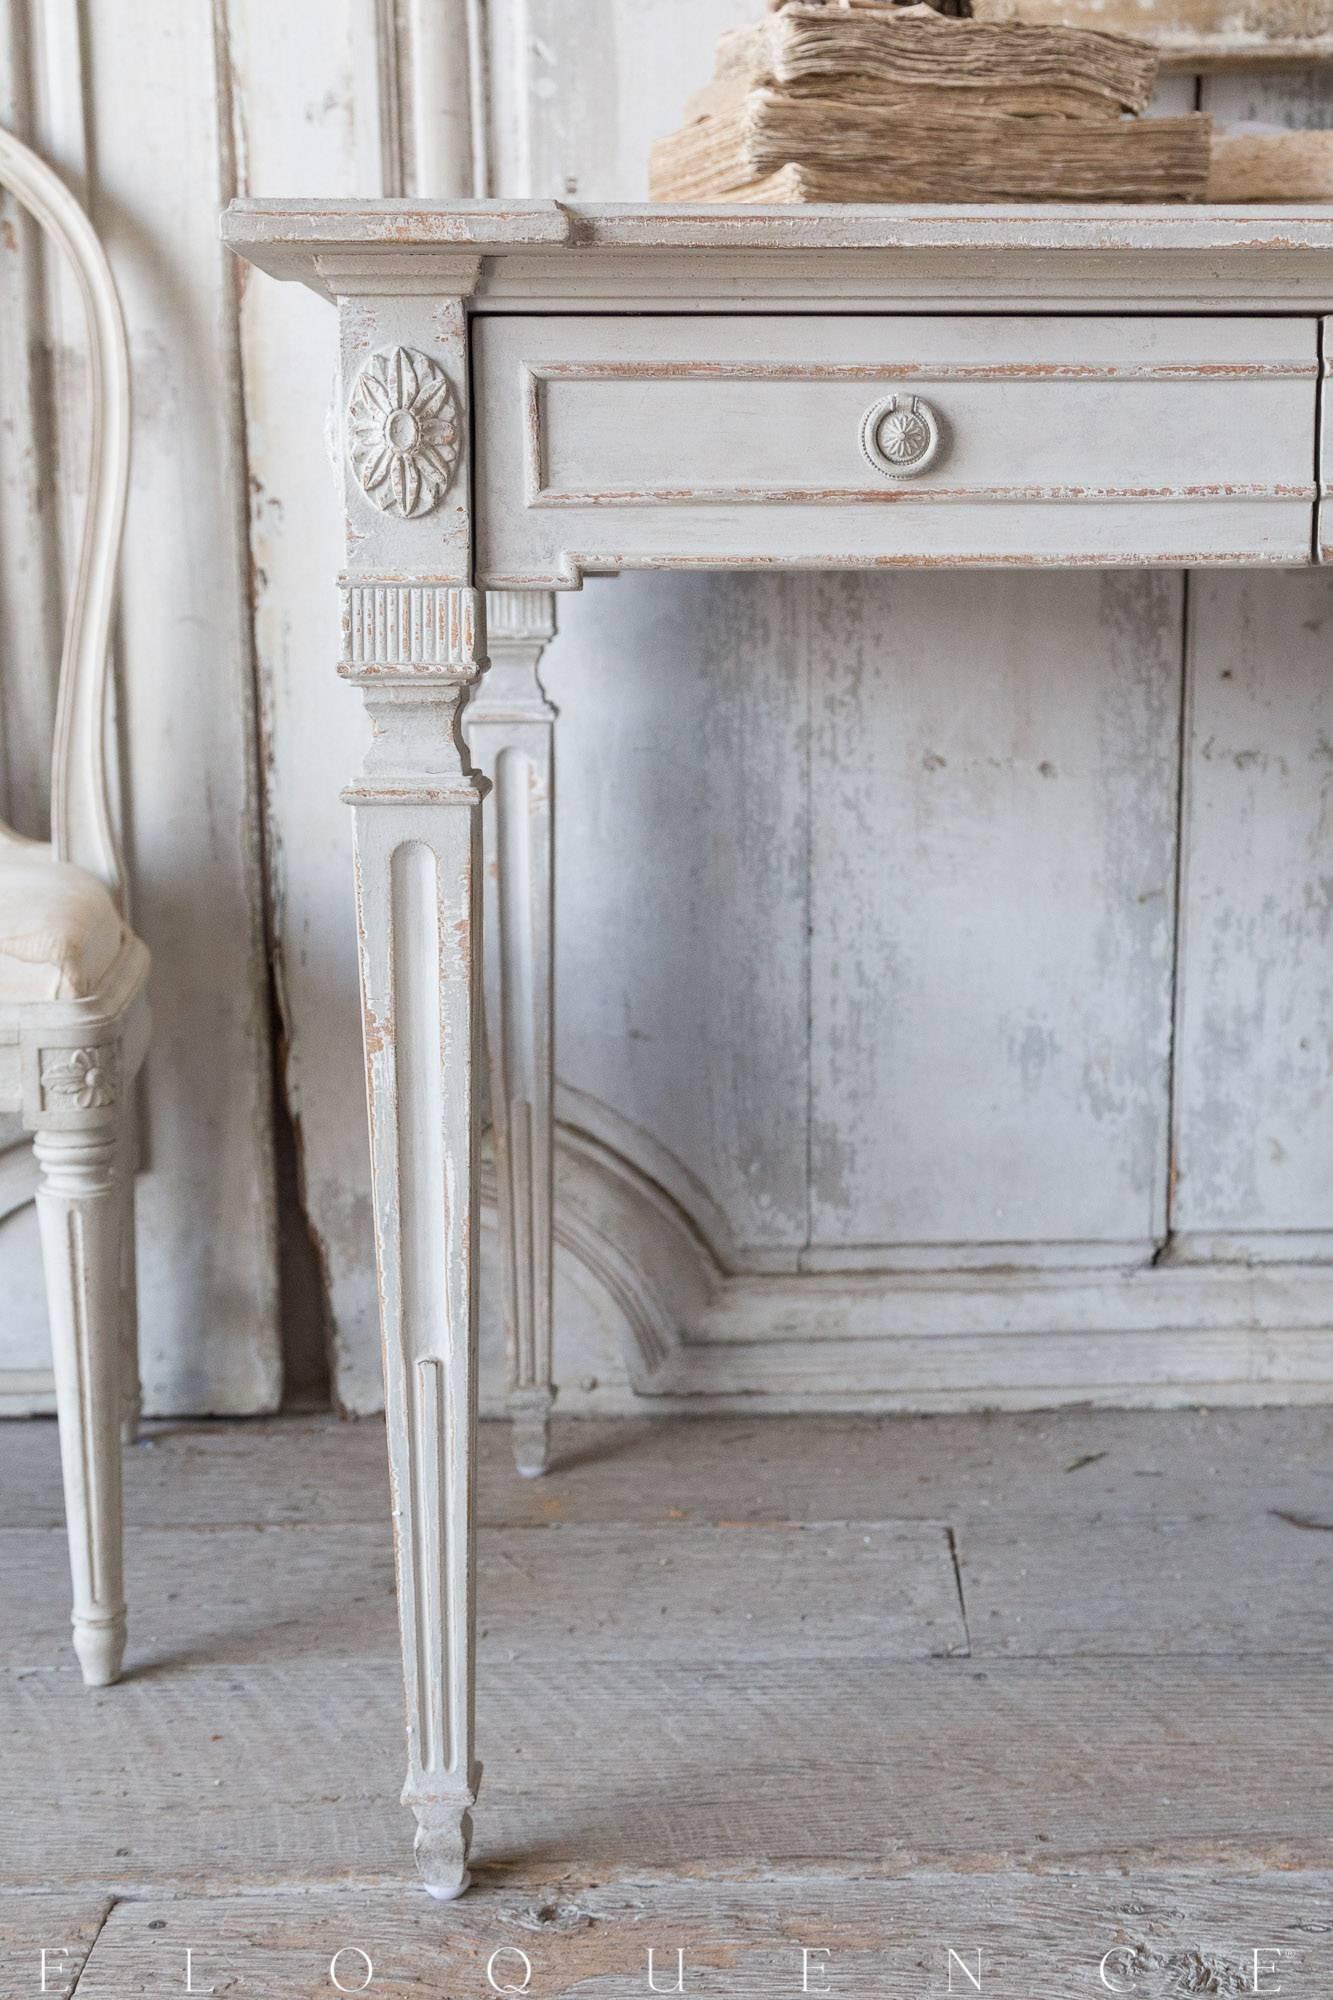 Eloquence® Herra writing desk in Gustavian grey finish. This piece shows off Classic lines adorned with delicate carvings, all finished a soft neutral tone that will compliment any living space. Lovingly worn at the edges and featuring two spacious